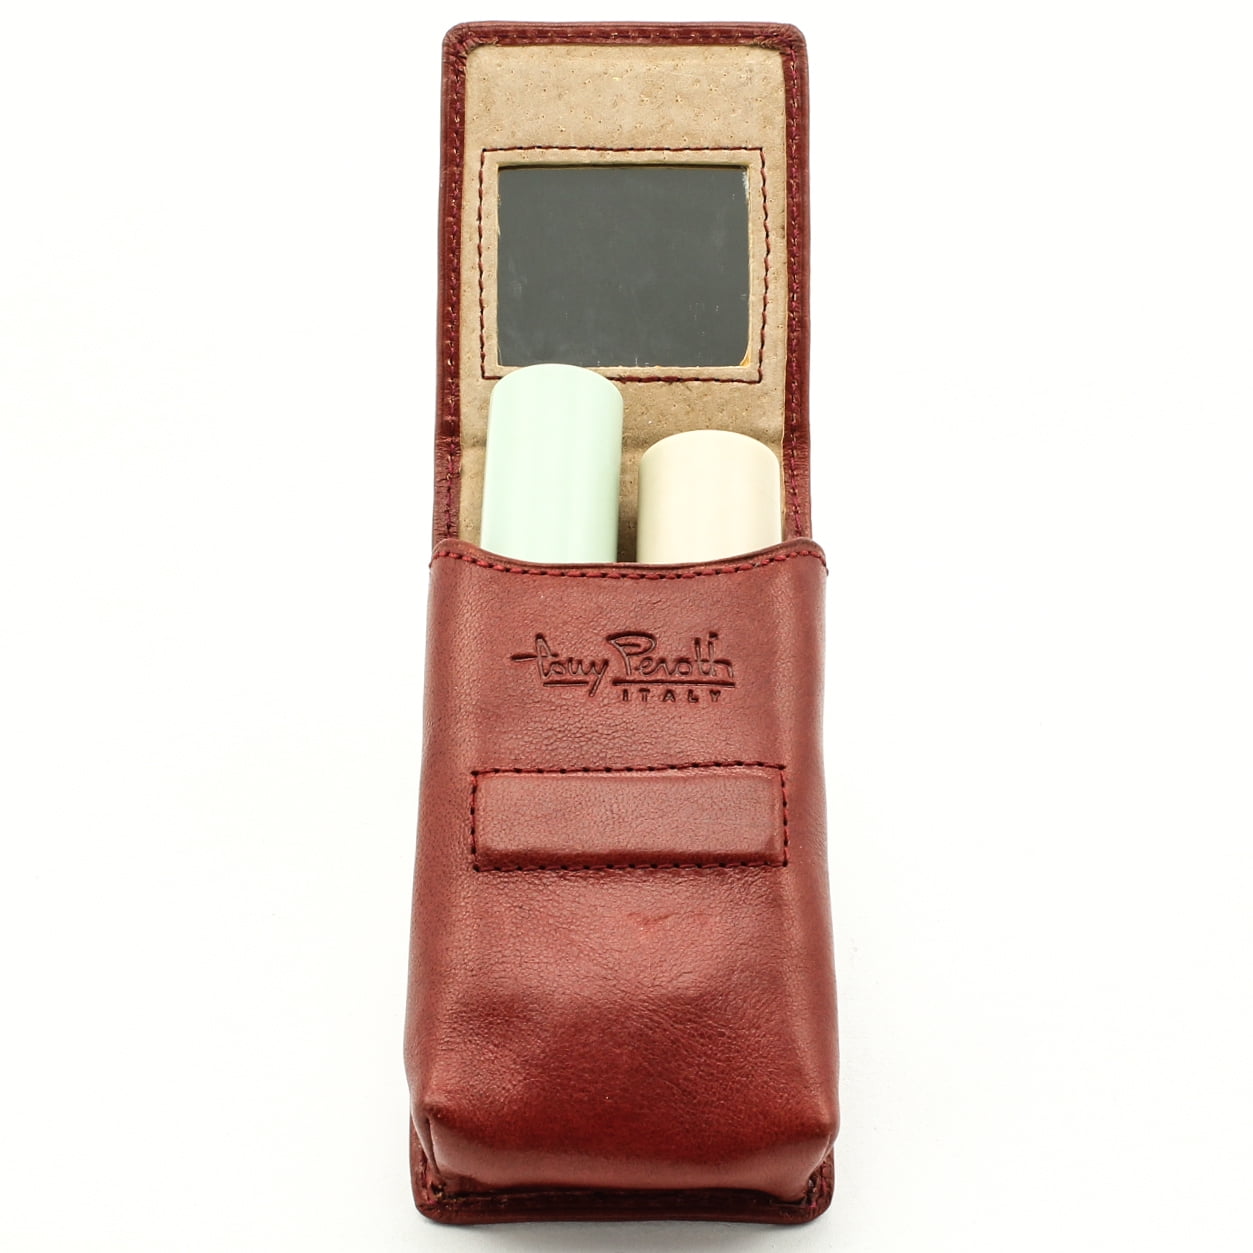 Genuine Leather Lipstick Holder Make-up Case Single Or Twin Holders With Mirror 